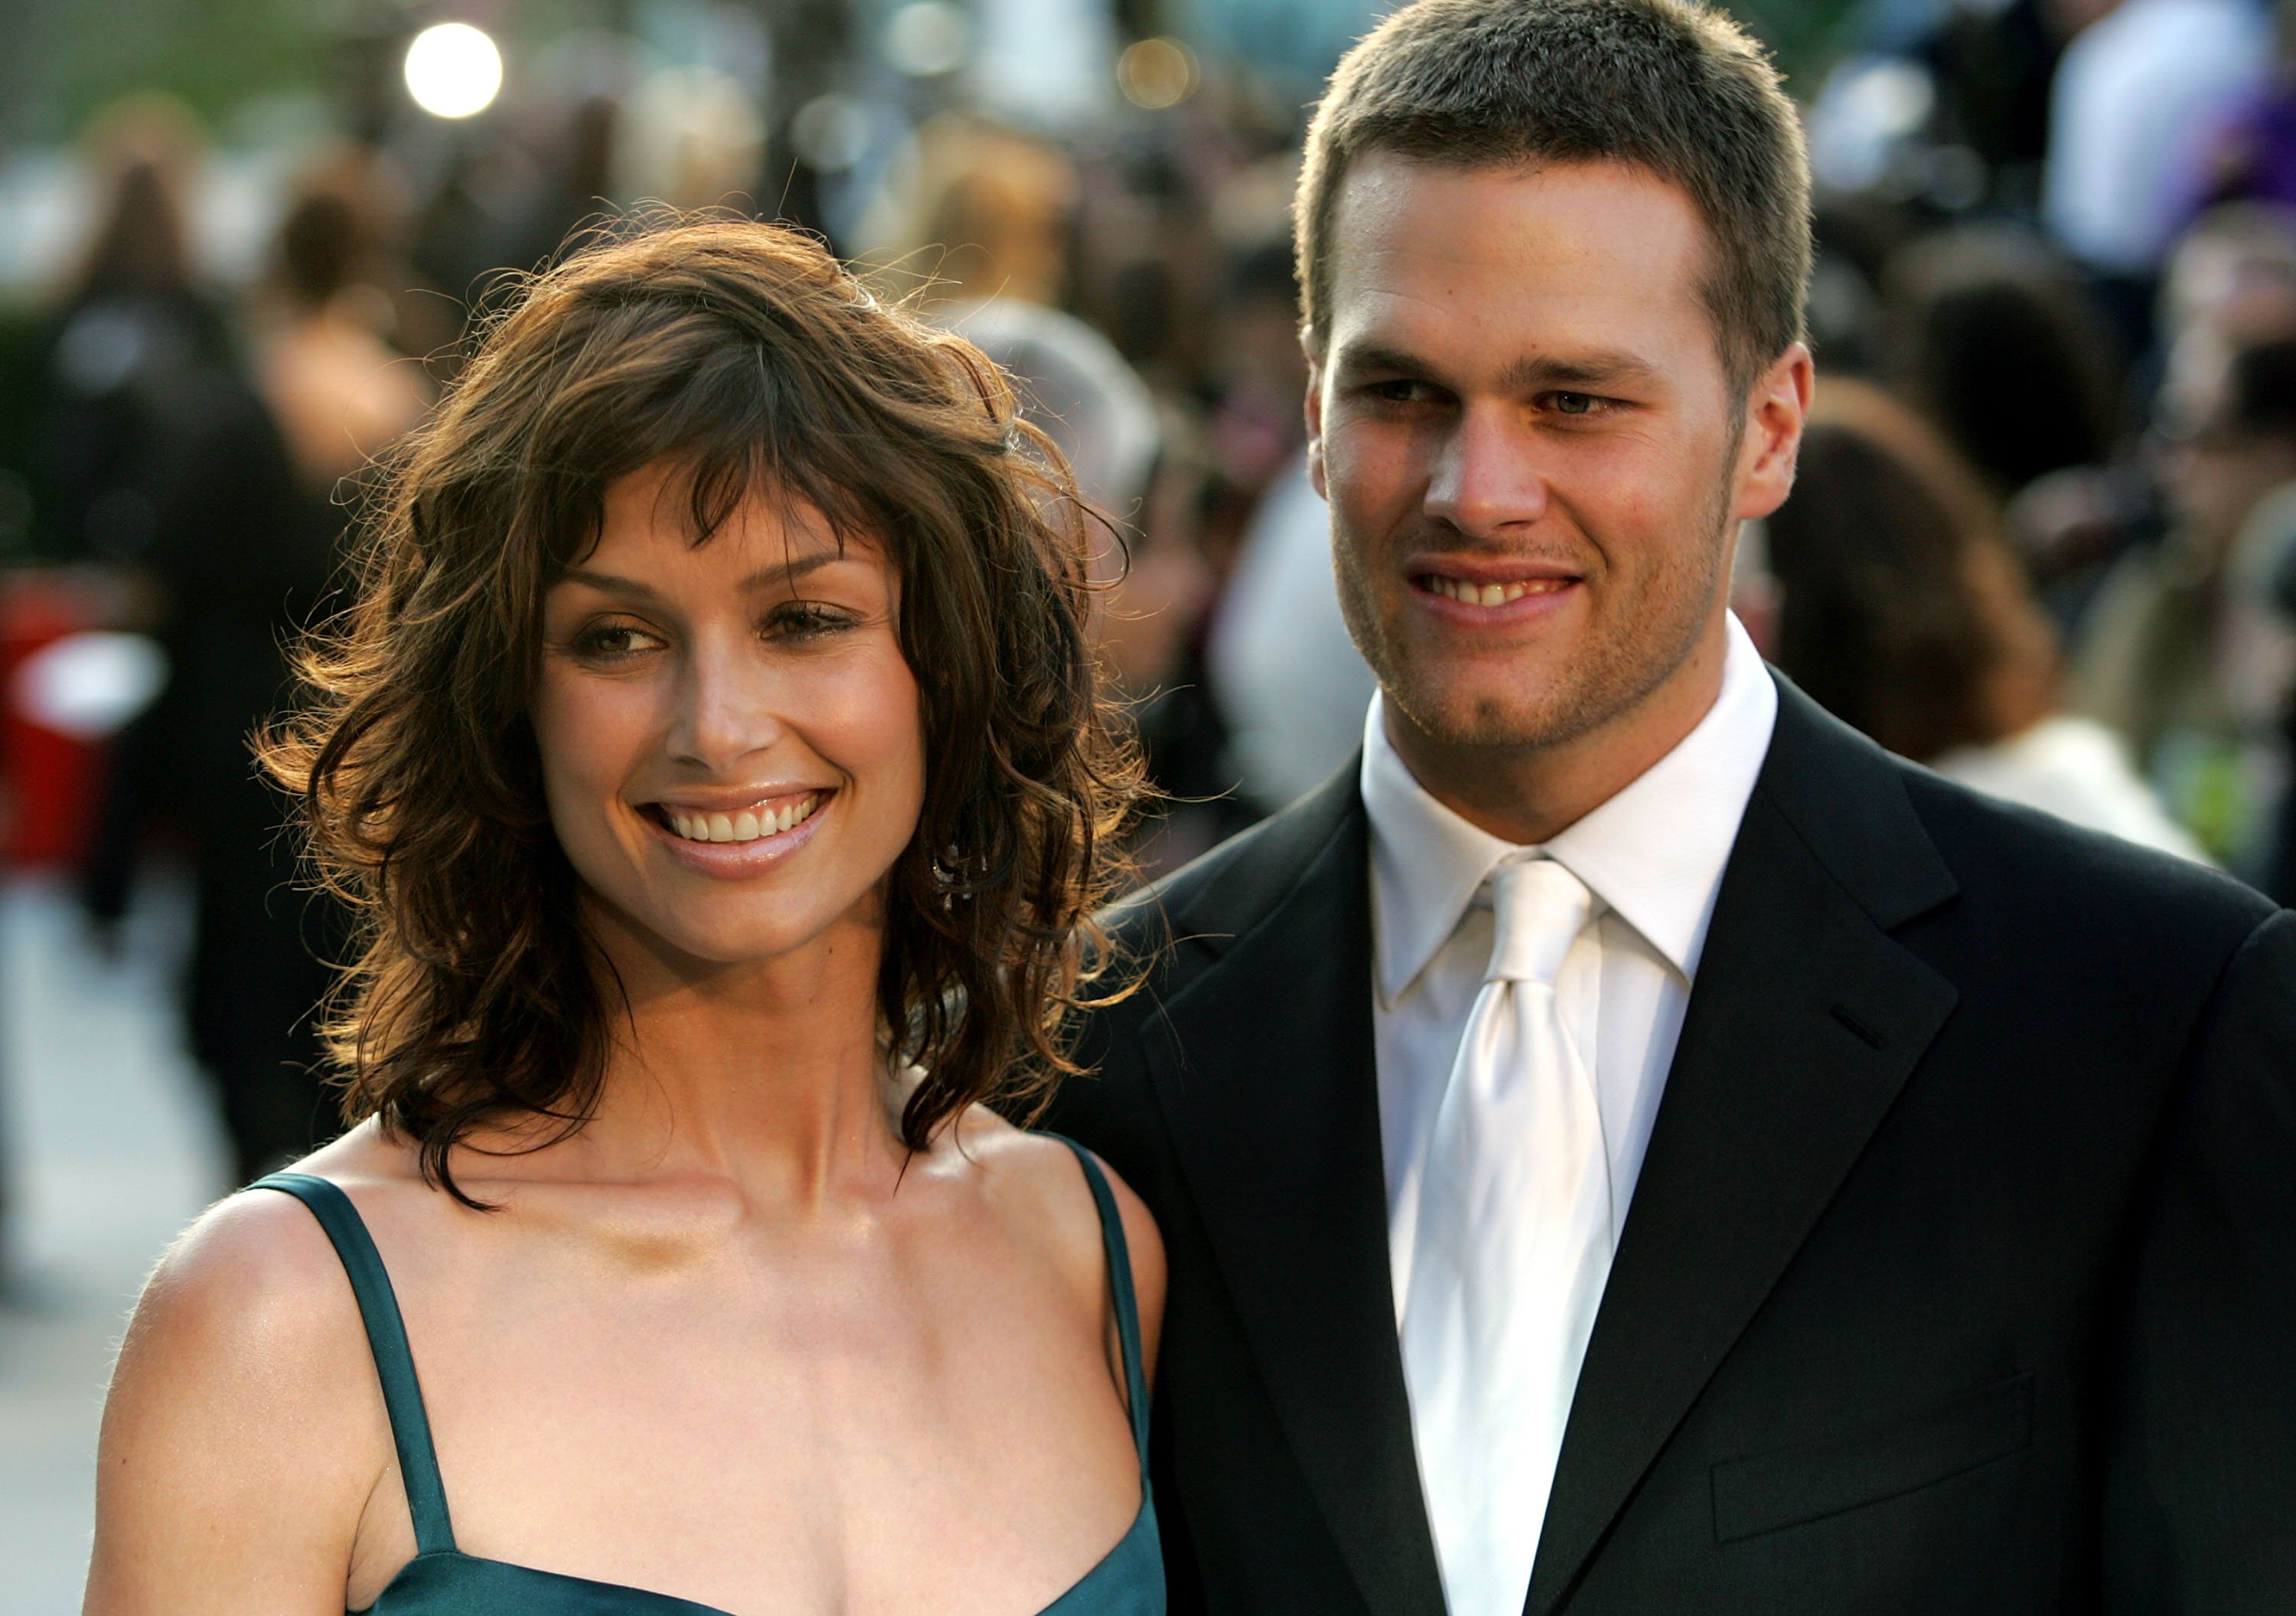 Actress Bridget Moynahan and quarterback Tom Brady arrive at the Vanity Fair Oscar Party at Mortons on February 27, 2005 in West Hollywood, California ┃Source: Getty Images